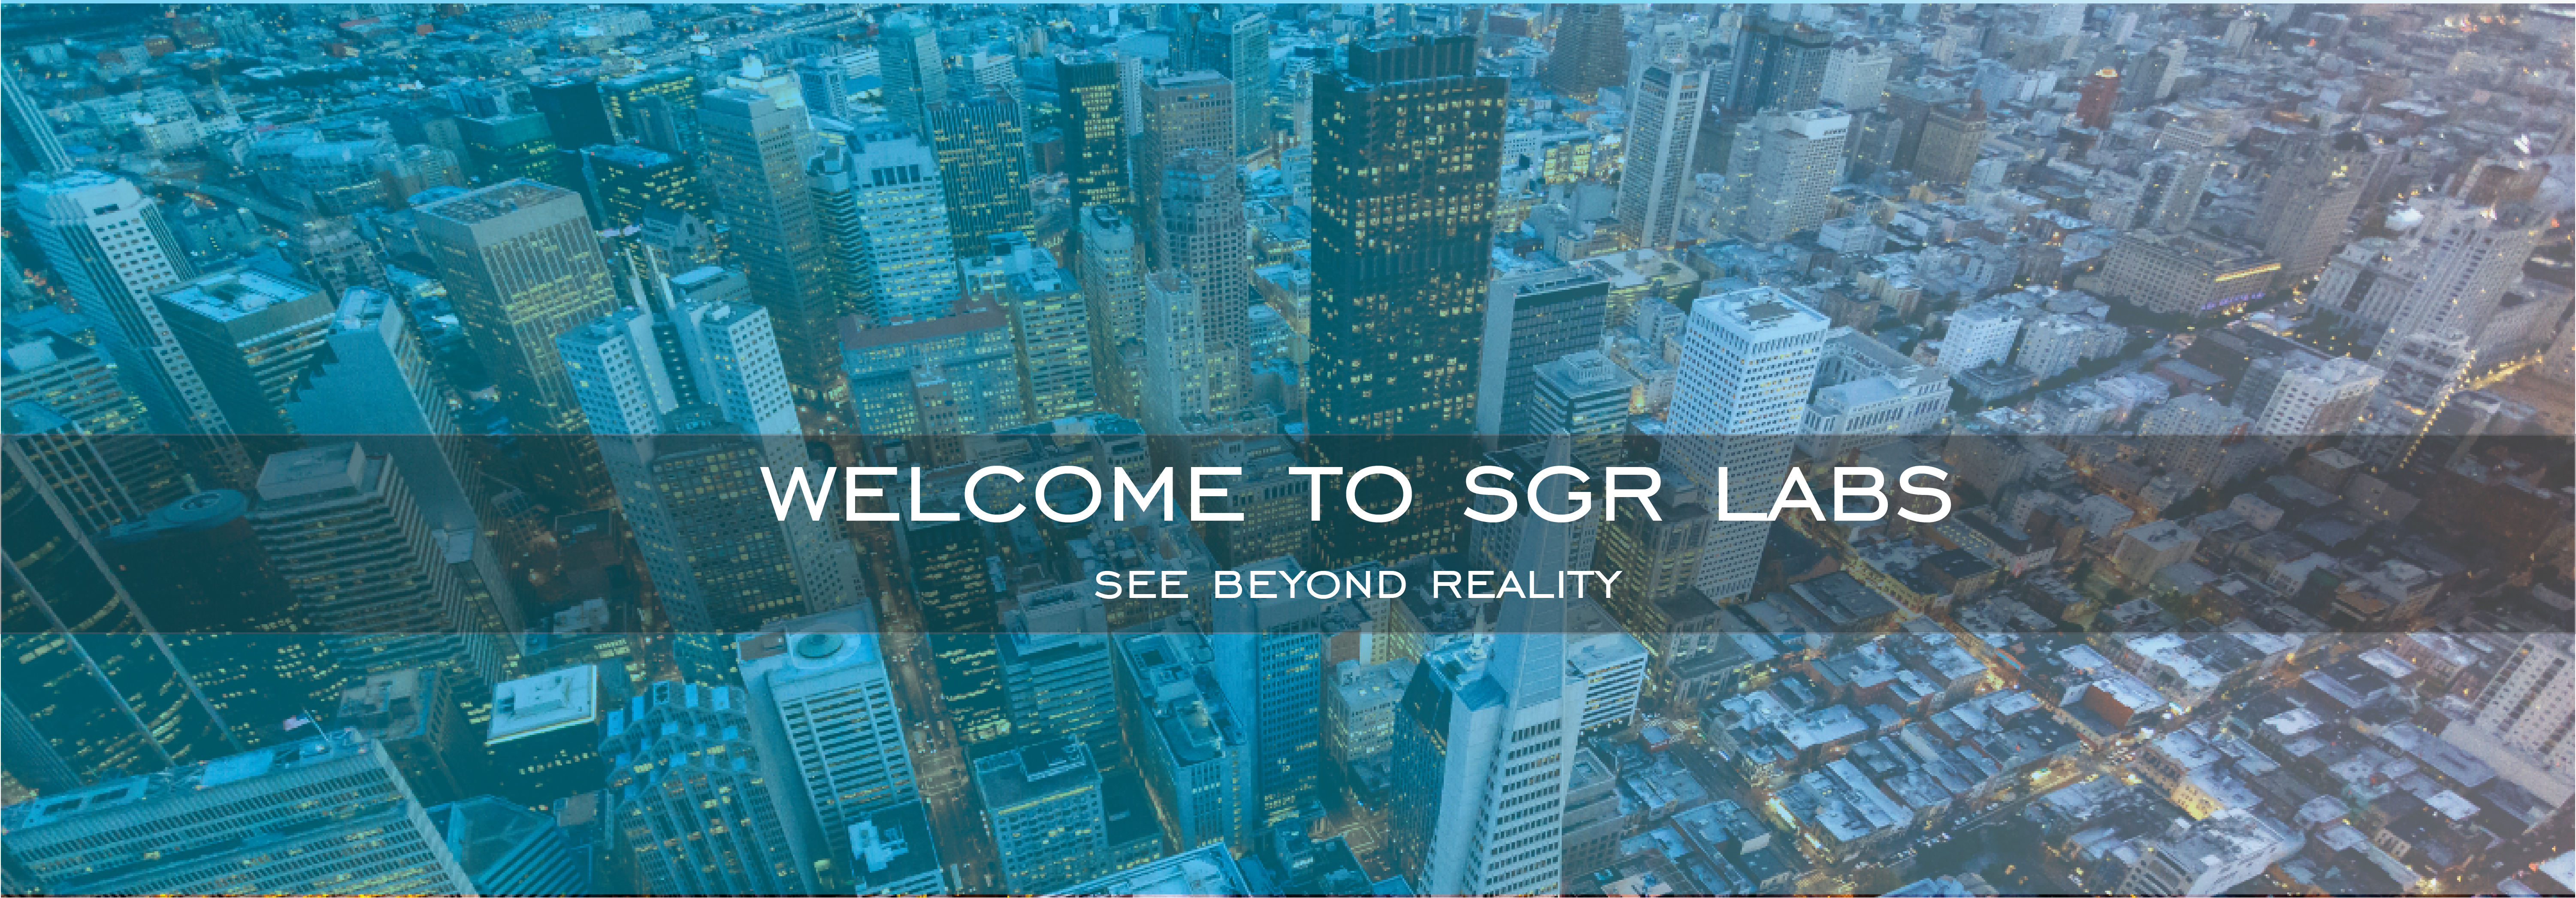 sgr labs welcome banner